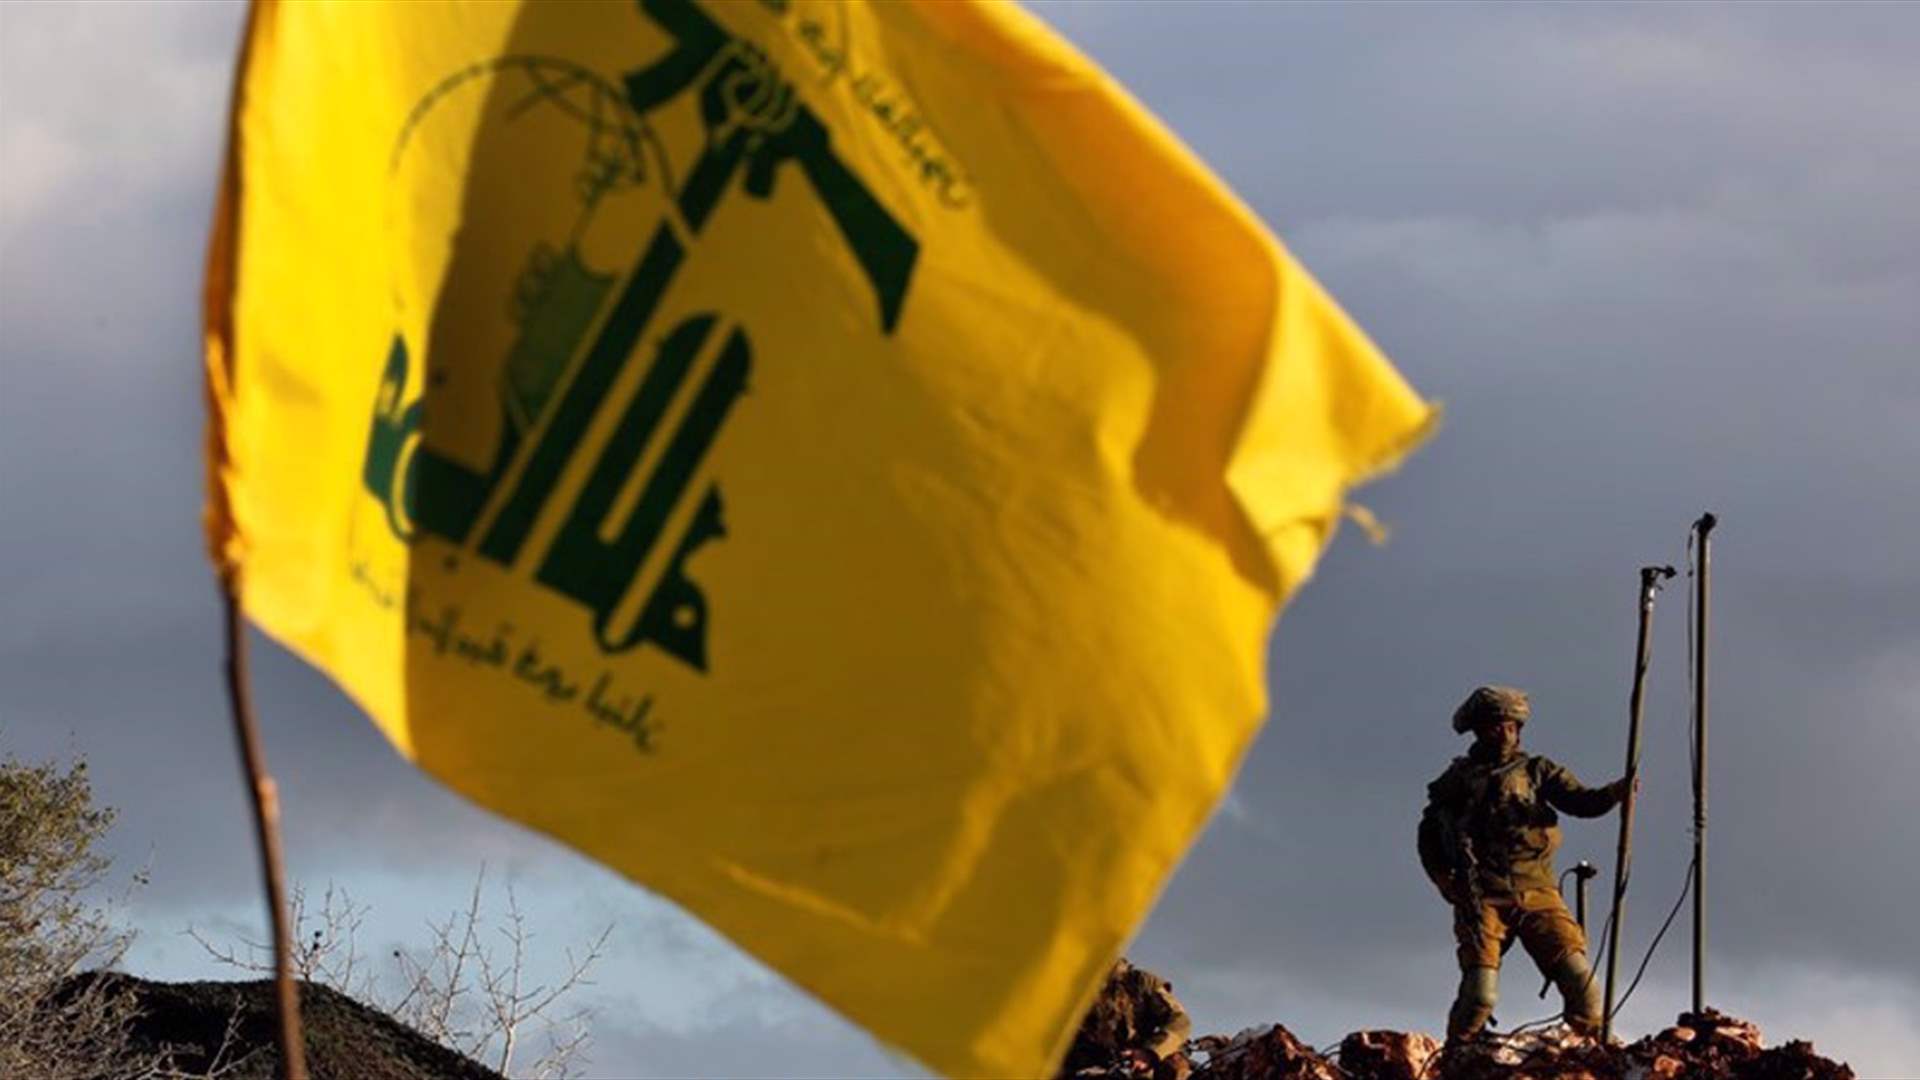 Hezbollah fighters score direct hits on Israeli targets in recent operations